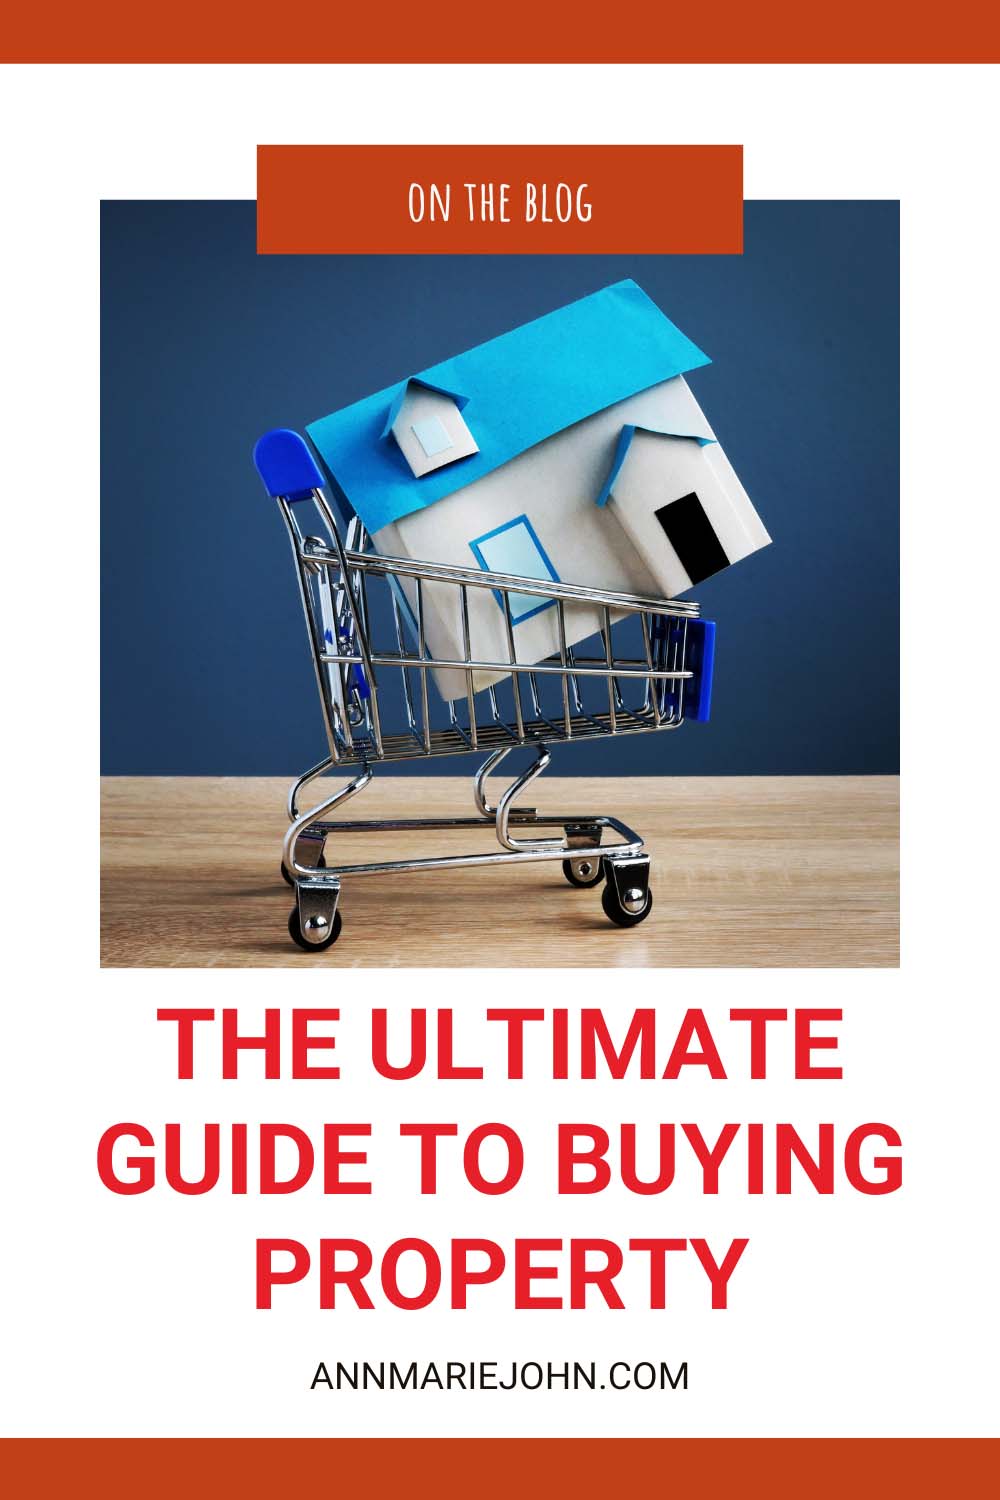 The Ultimate Guide to Buying Property